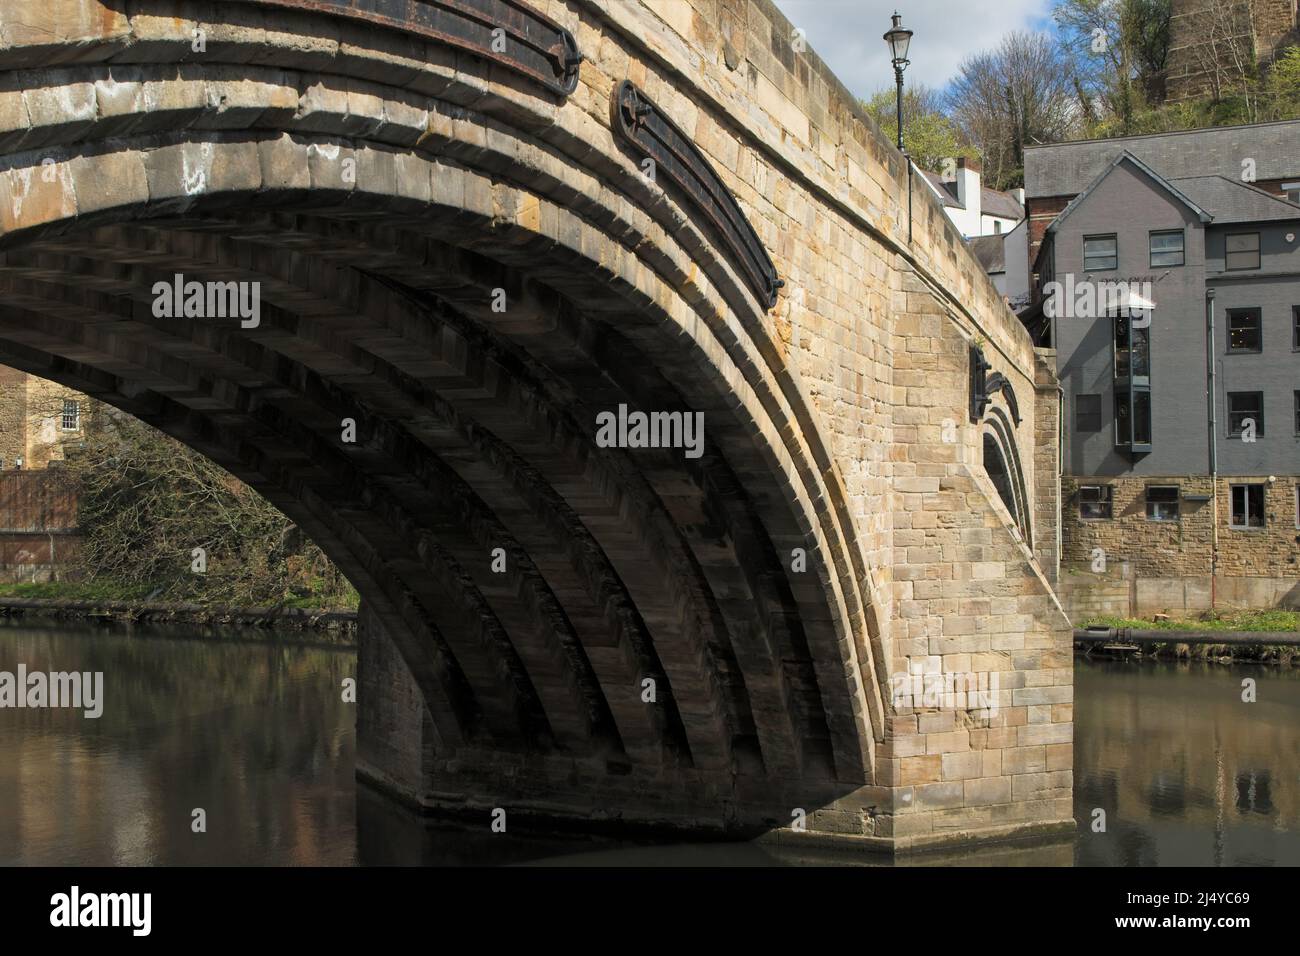 Framwellgate Bridge is a mediaeval masonry arch bridge across the River Wear, in Durham, England. It is a Grade I listed building. Stock Photo